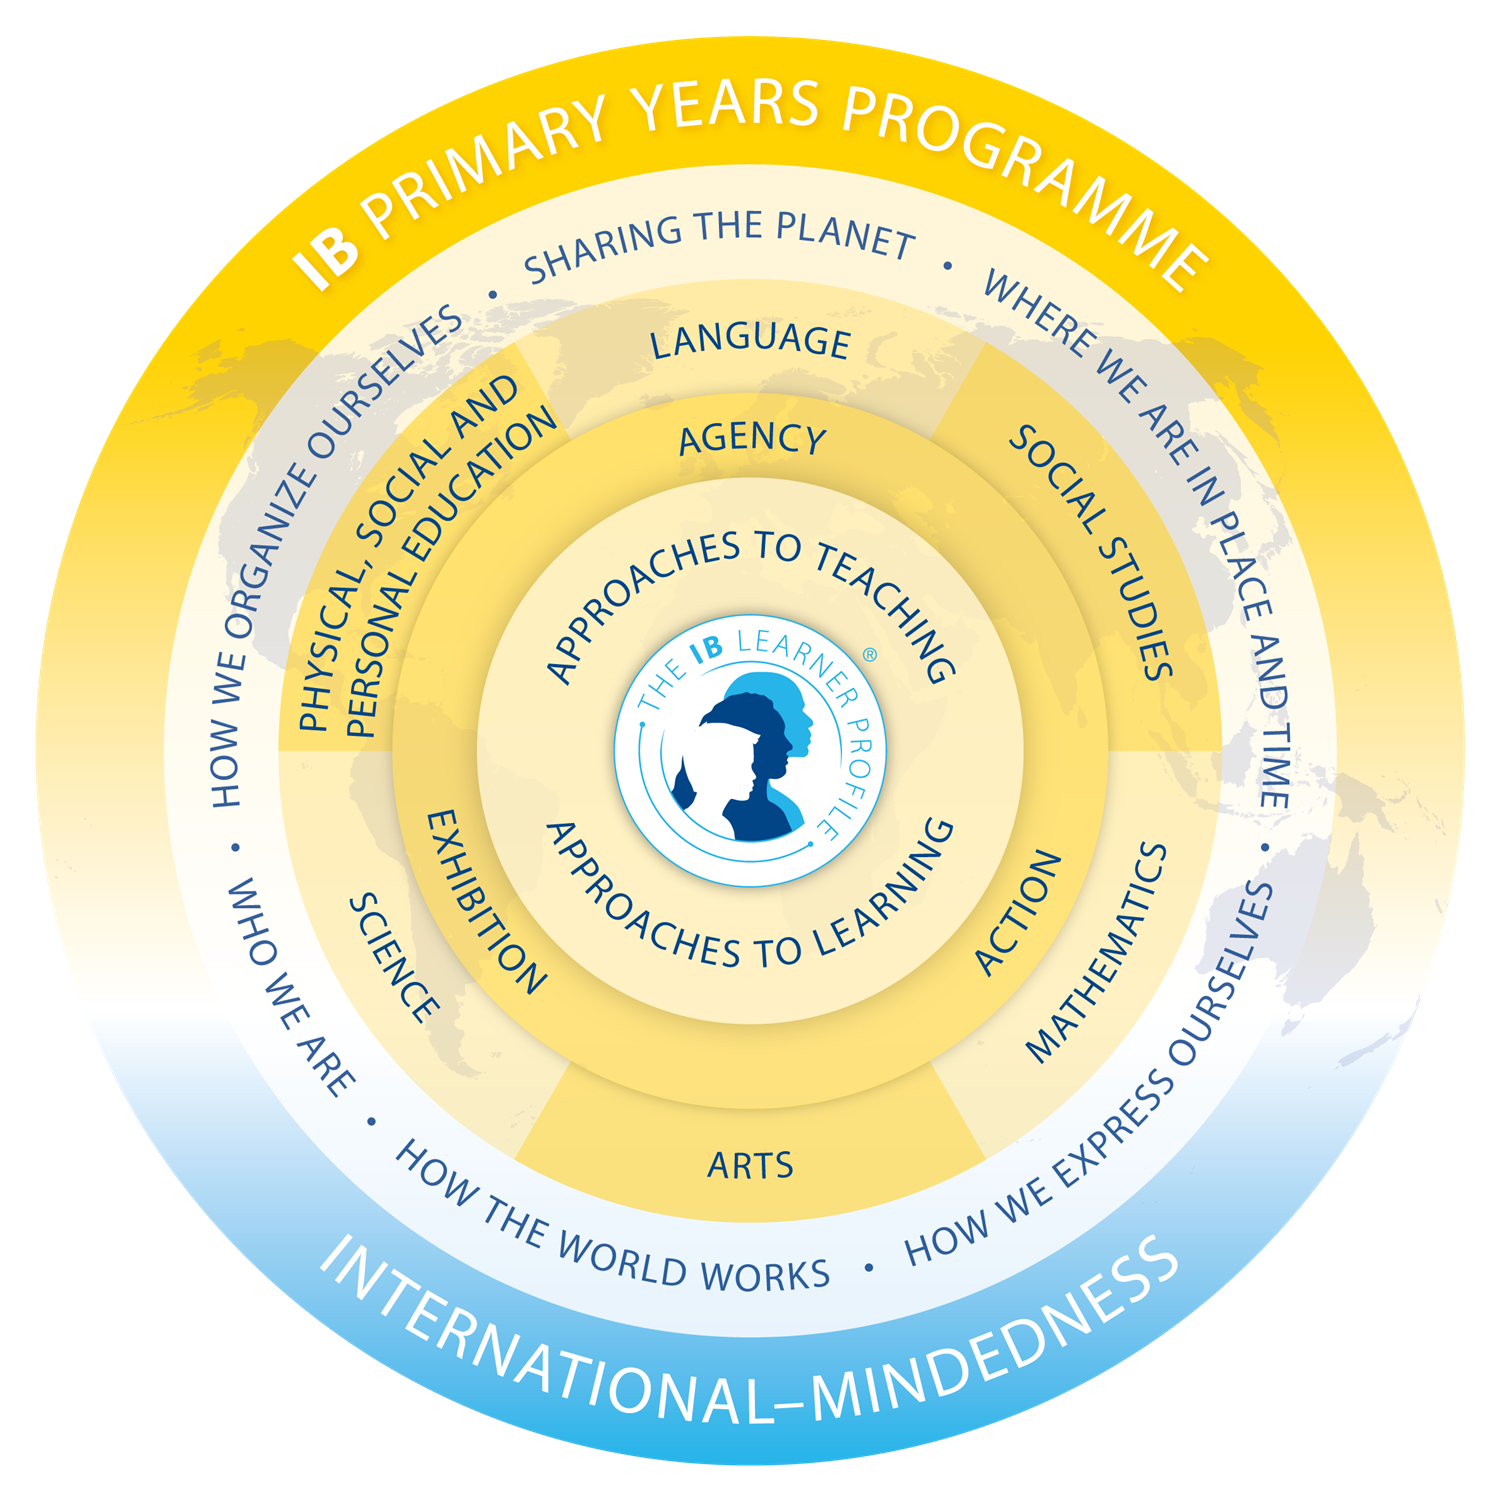 IB PYP Model explaining the different components of the PYP